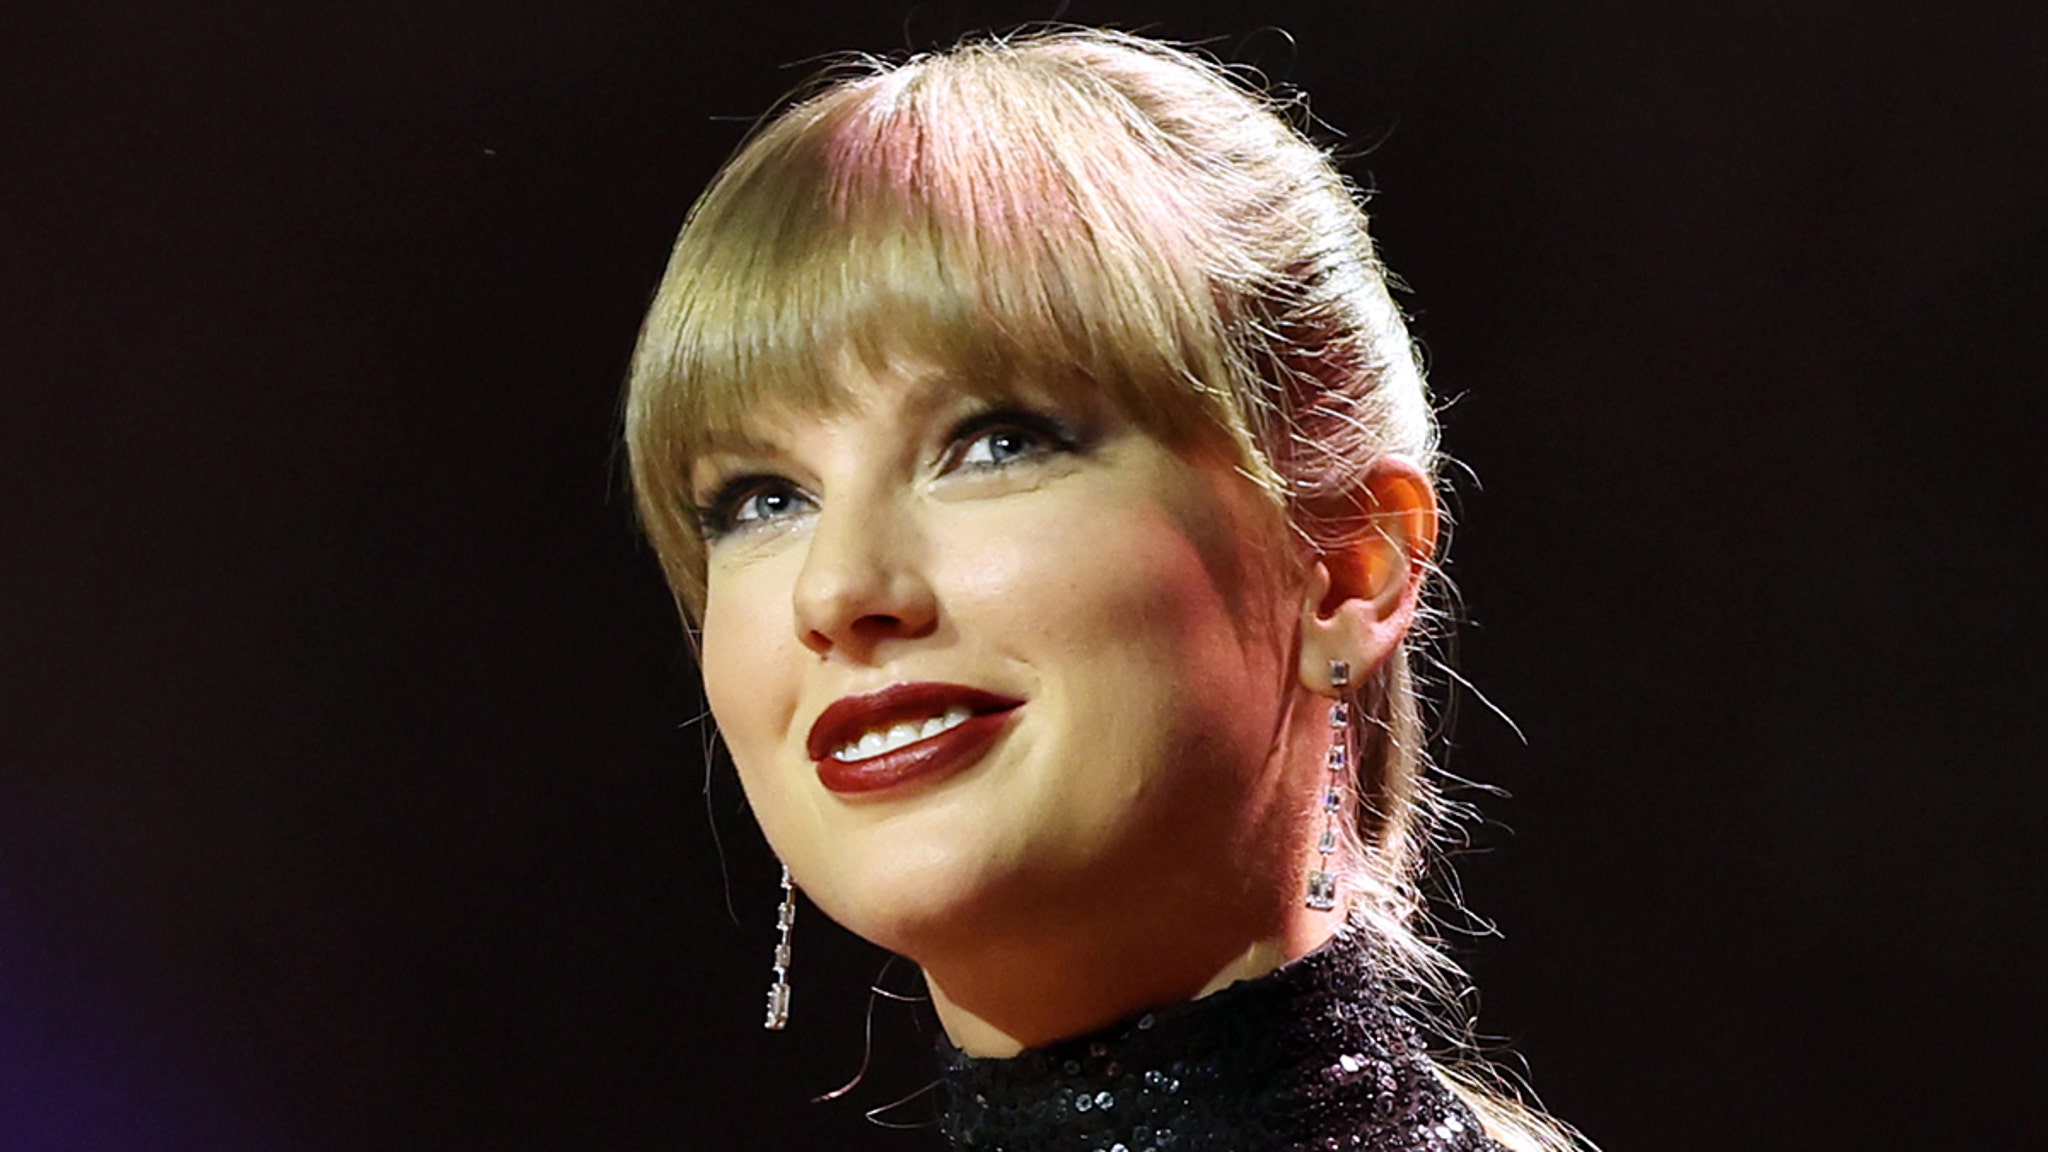 Taylor Swift releases 4 new tracks, including Love Song About Joe Alwyn